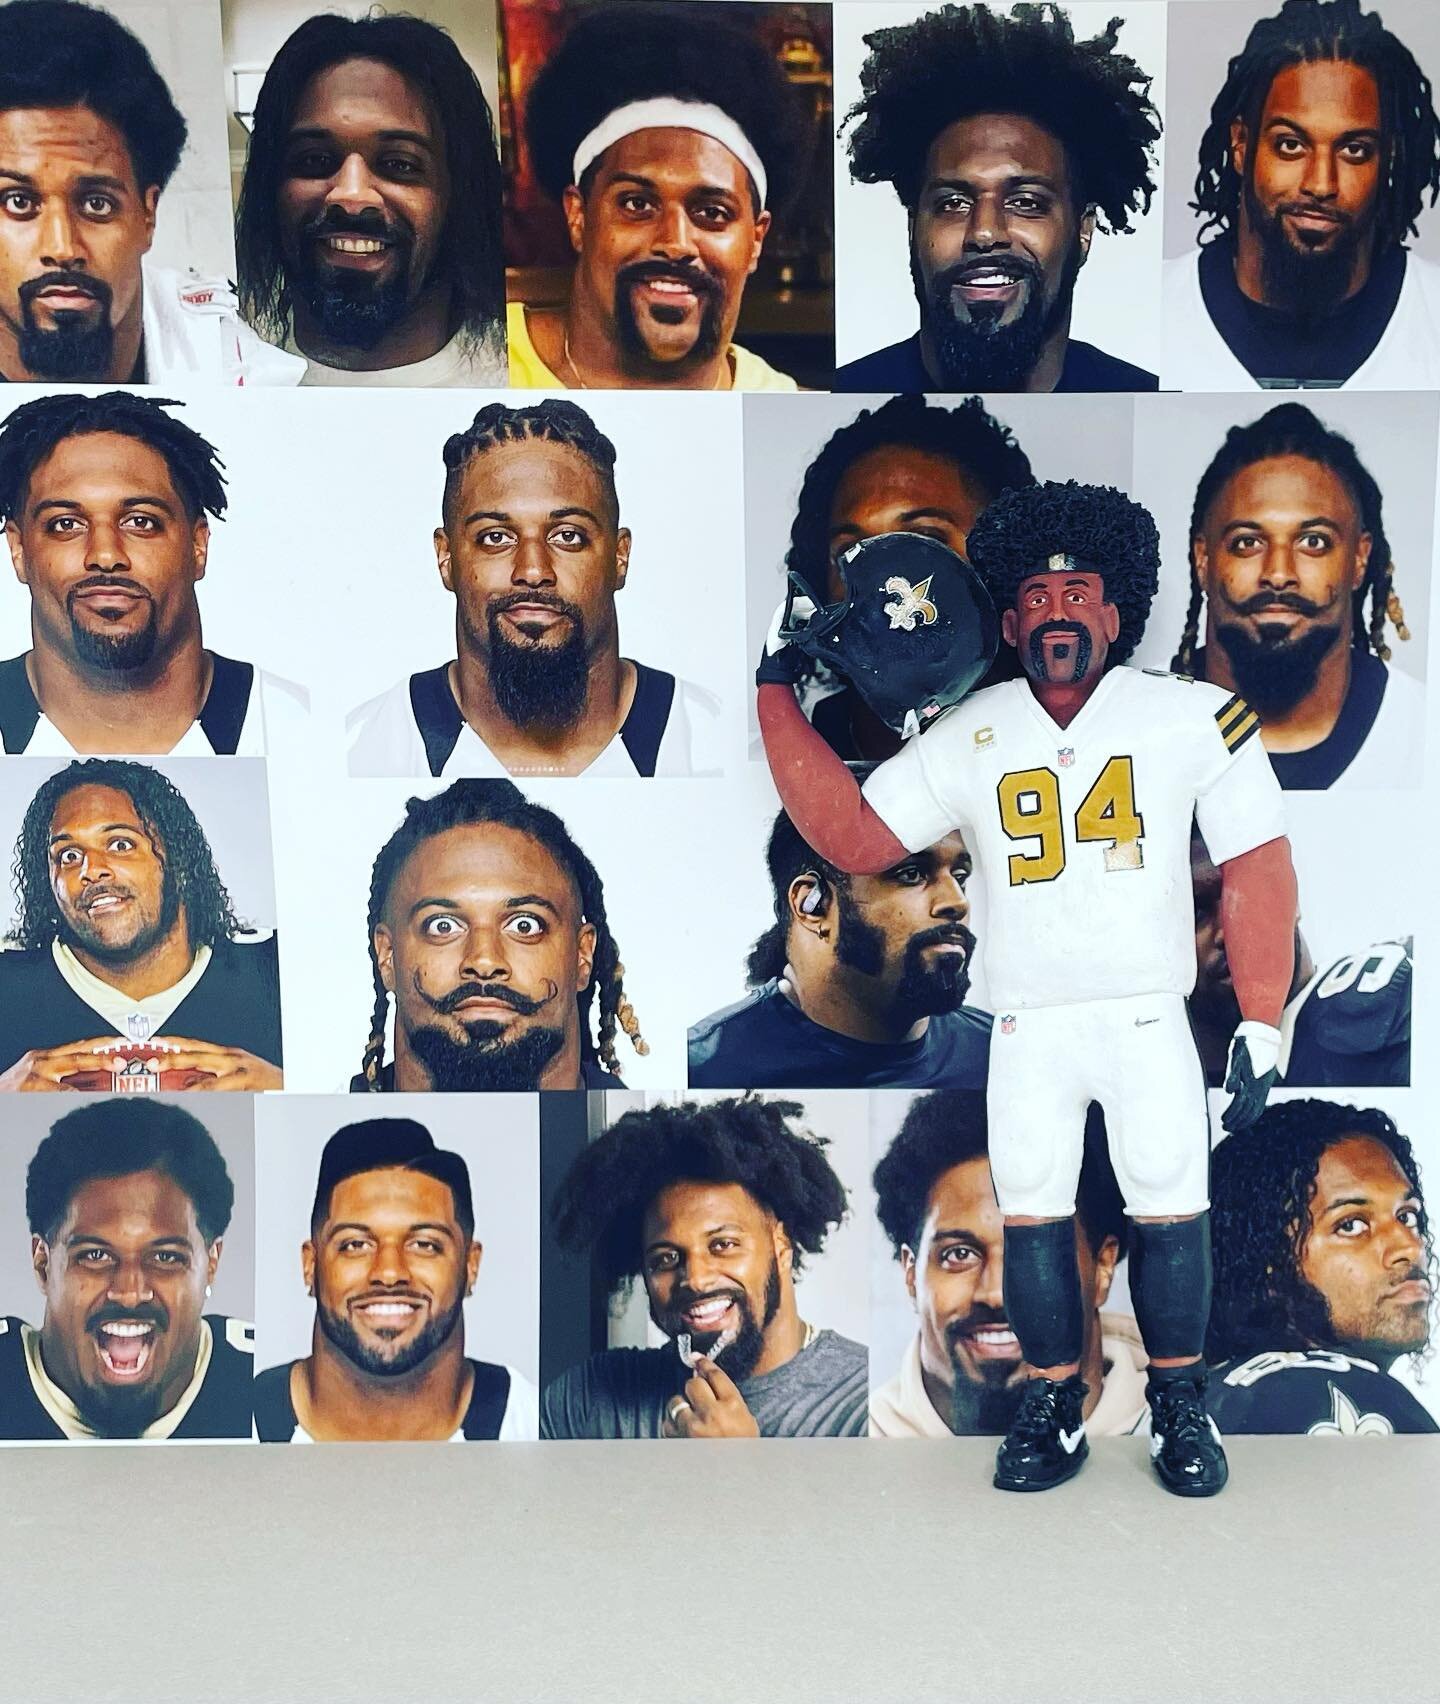 This man has lots of looks. This Sunday I&rsquo;m predicting the look of a warrior.

#alltmontsculptures #alltmontsframing #camjordan94 #oliviagreypritchardphotography #saints #nola #sculptureswithcaricature #popart #sculpey_official #jaboowins #alvi